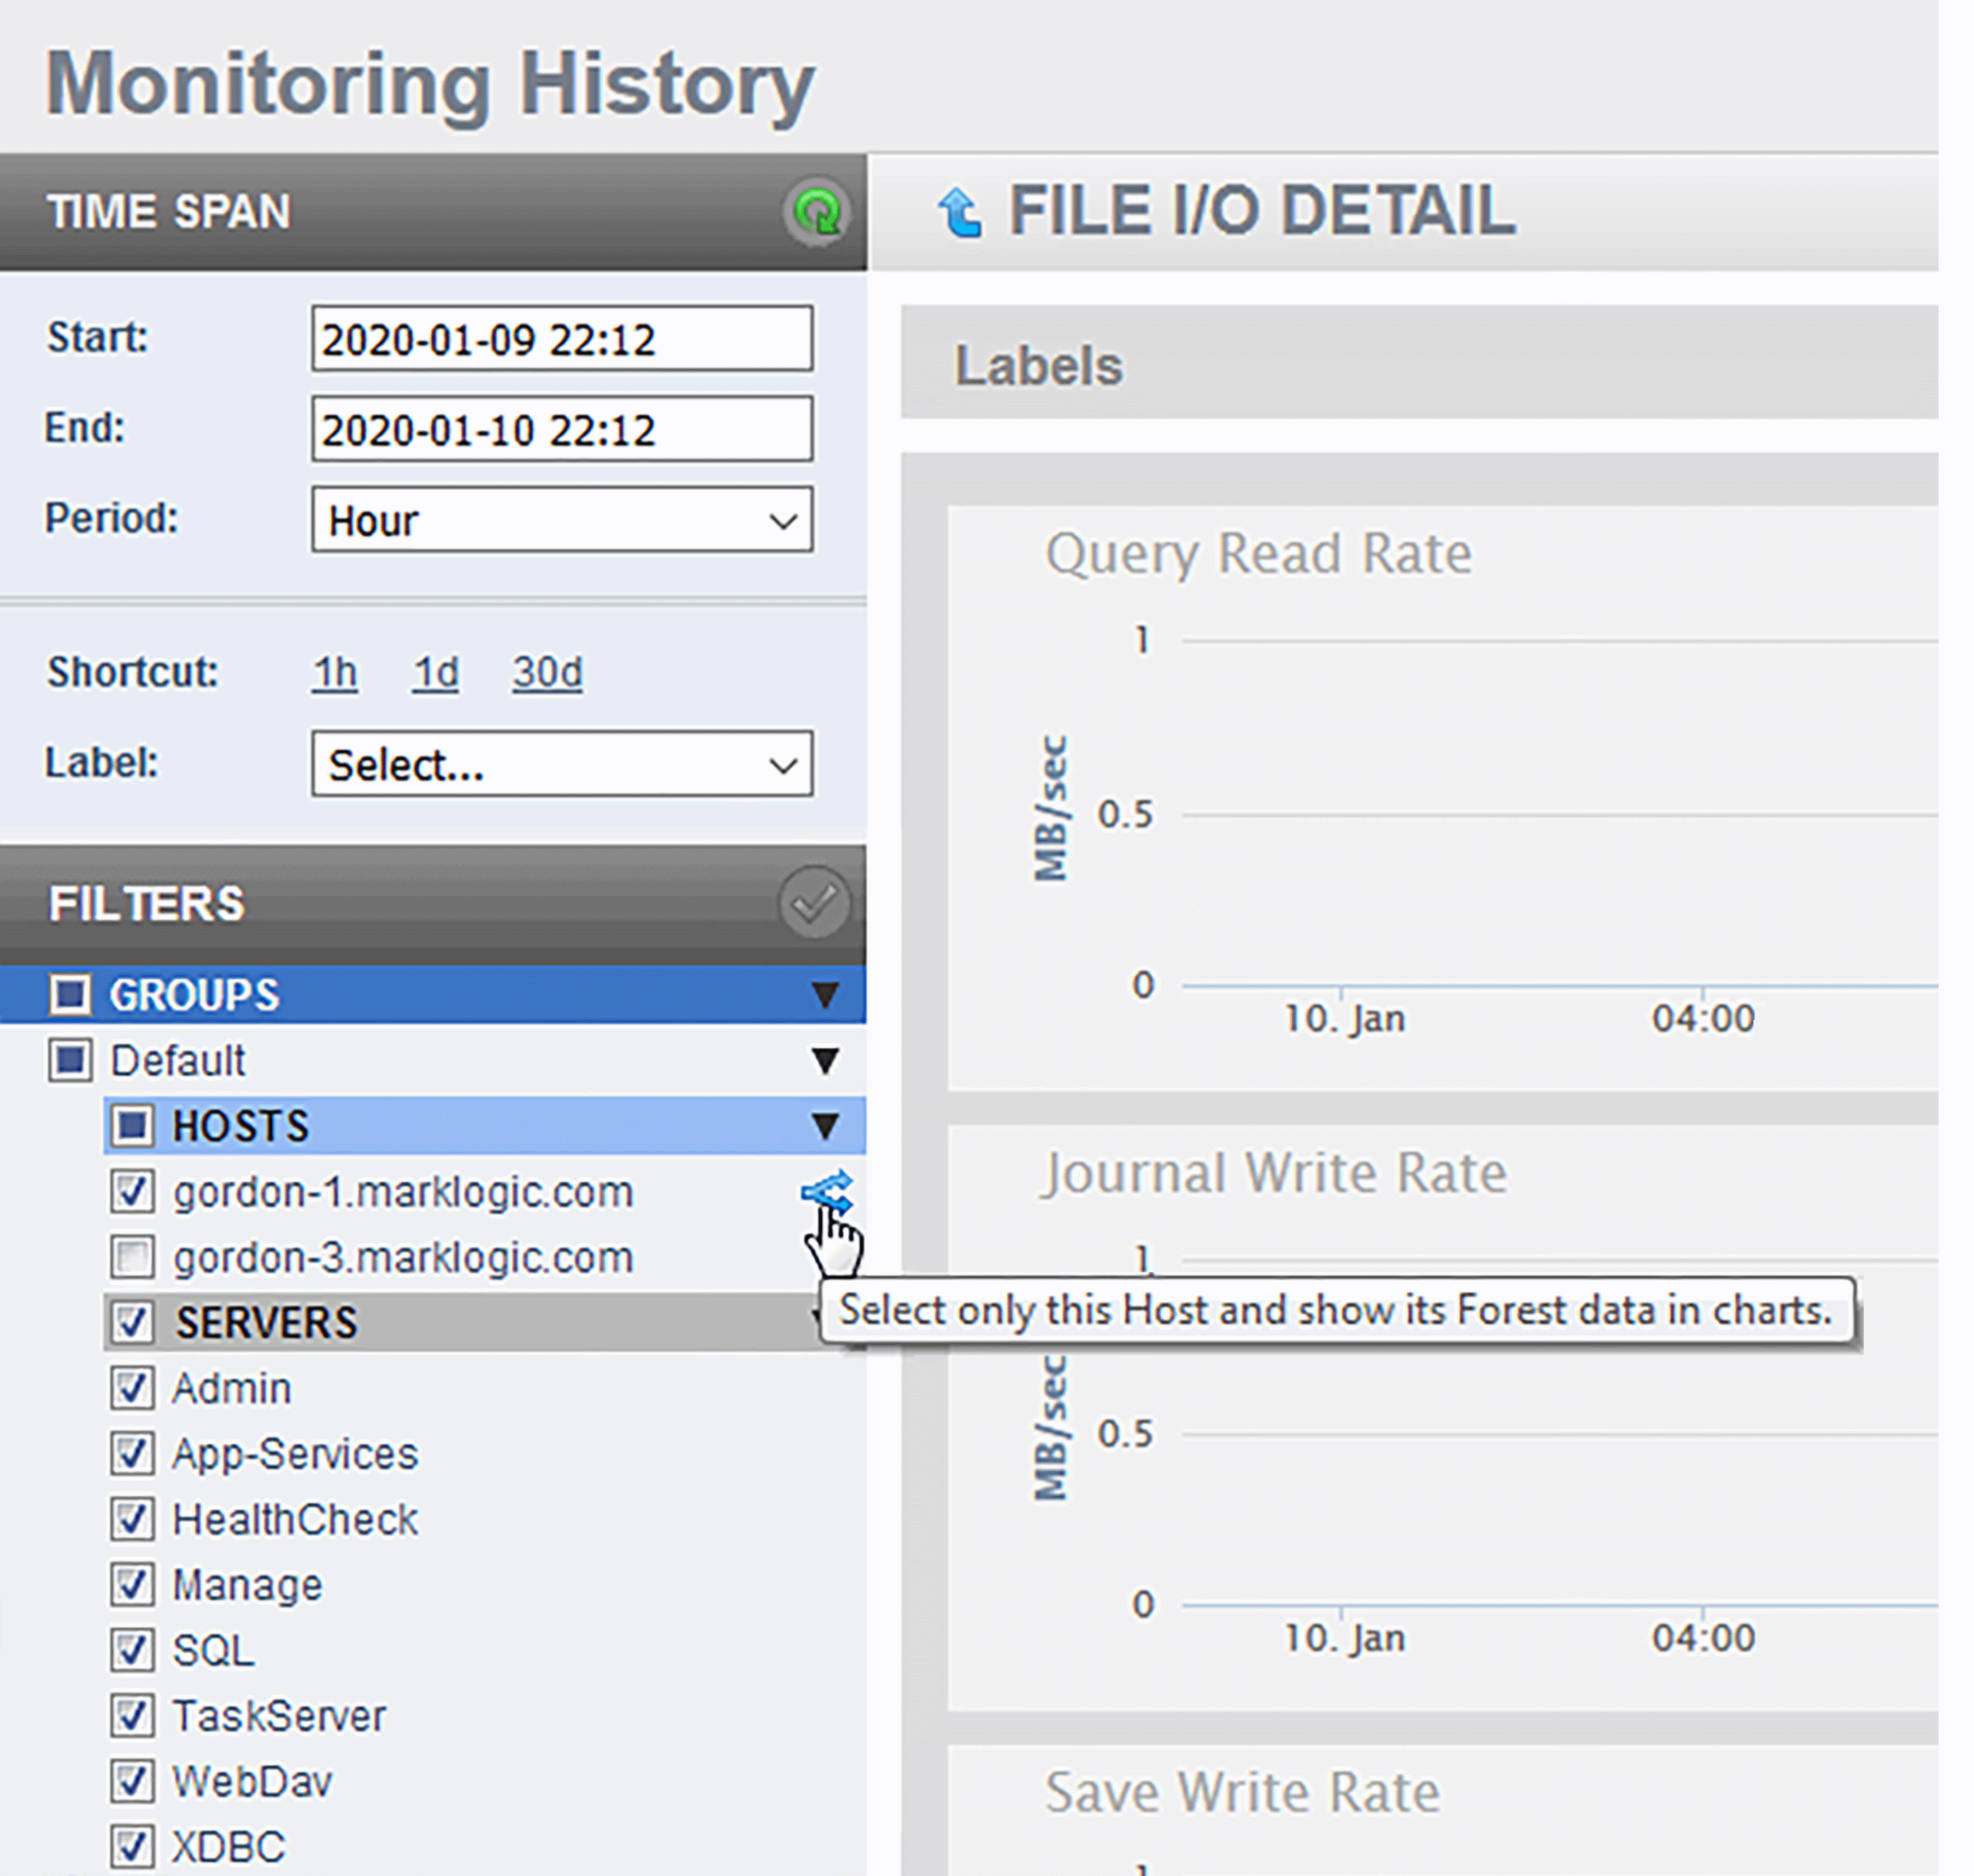 Screenshot of the FILE I/O DETAIL page. You can rollover any Host filter to reveal the Select and Expand button. This will deselect all of the other Hosts across all Groups, and apply all pending filter changes. The expanded charts display the data for each forest in that host as separate line in each chart.